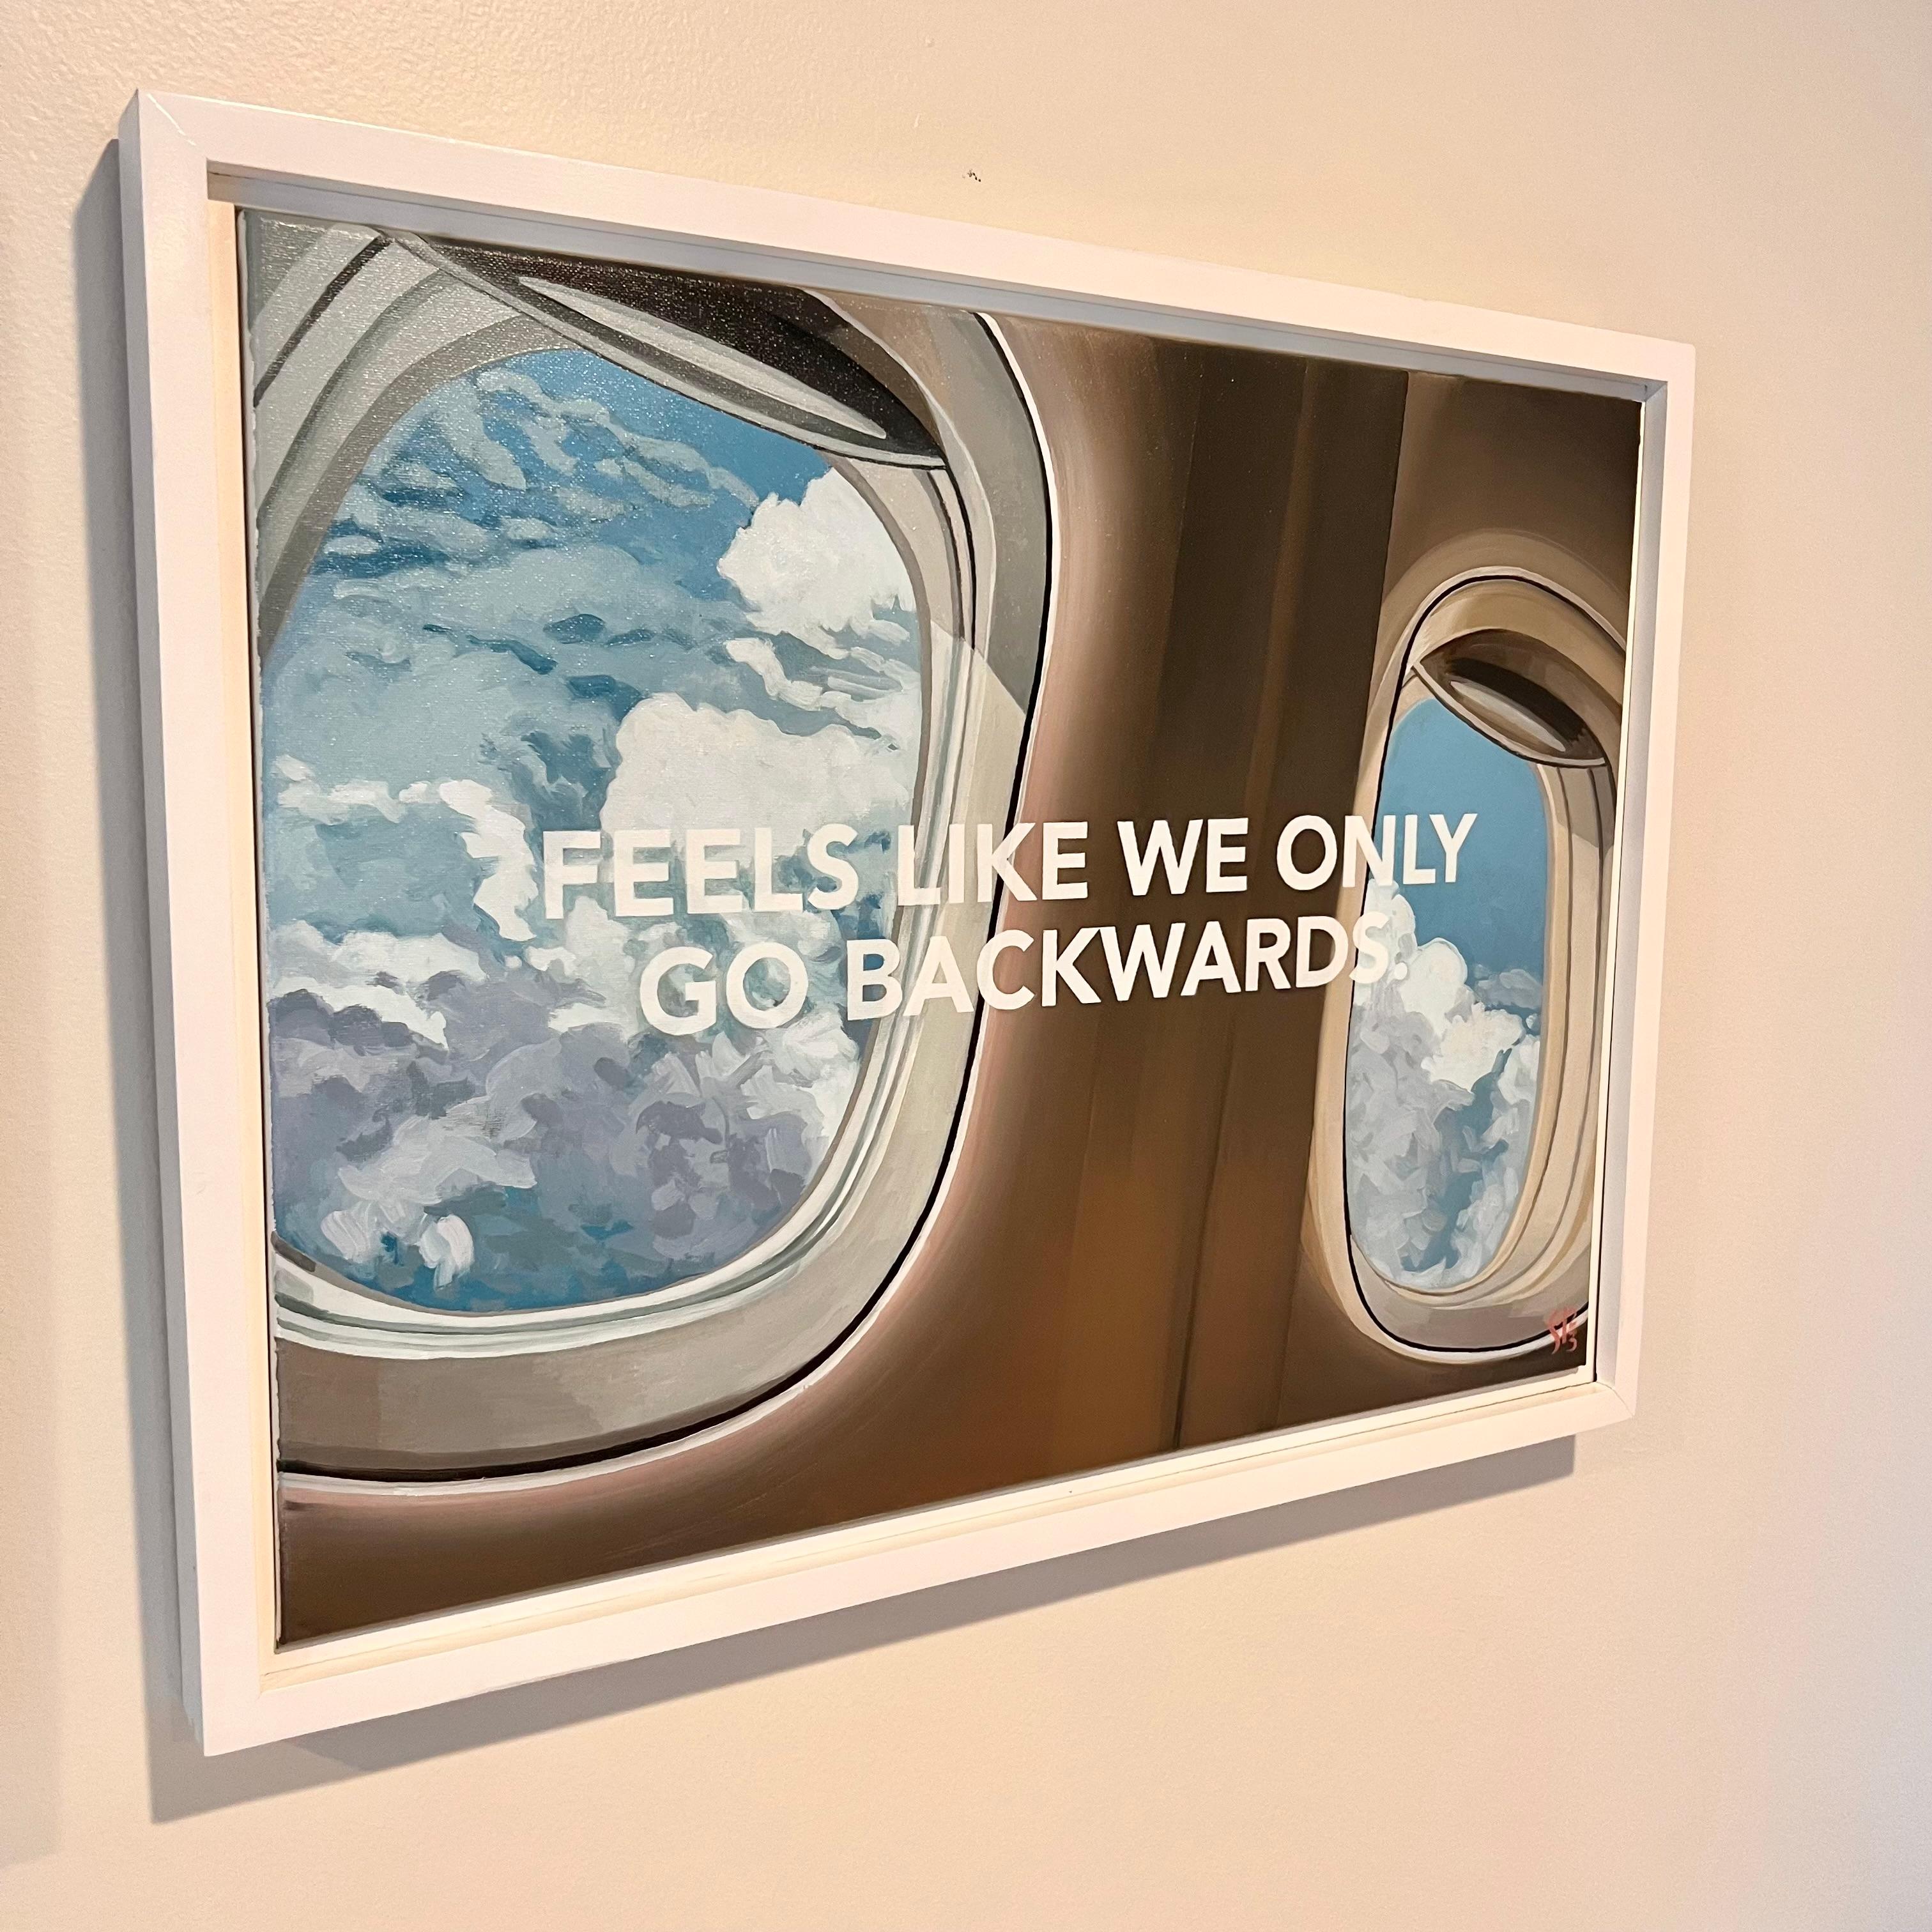 Original oil on canvas Pop Art painting by local Los Angeles artist. Reminiscent of works by Ed Ruscha. Painting of interior view of airplane looking out to the sky through plane windows with block text reading “FEELS LIKE WE ONLY GO BACKWARDS”.